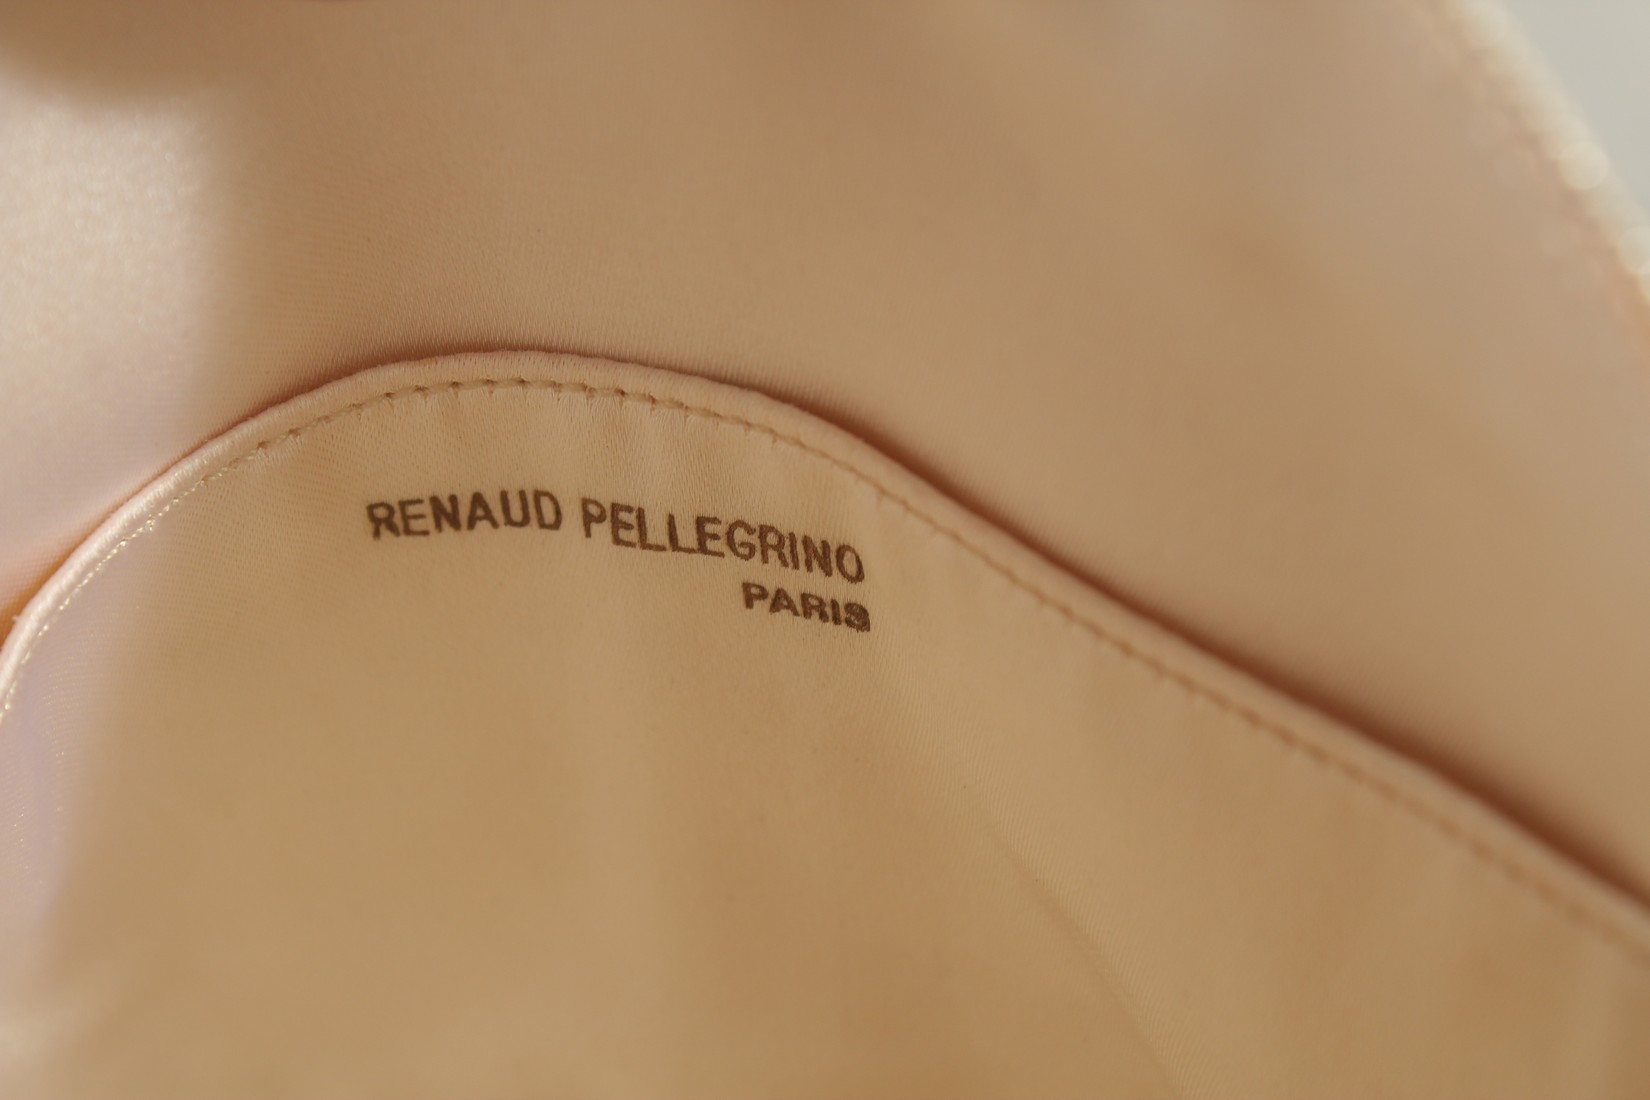 A RENAUD PELLEGRINO, PARIS, WHITE SILK BAG with carrying handles. 20cms long x 18cms high. - Image 3 of 3